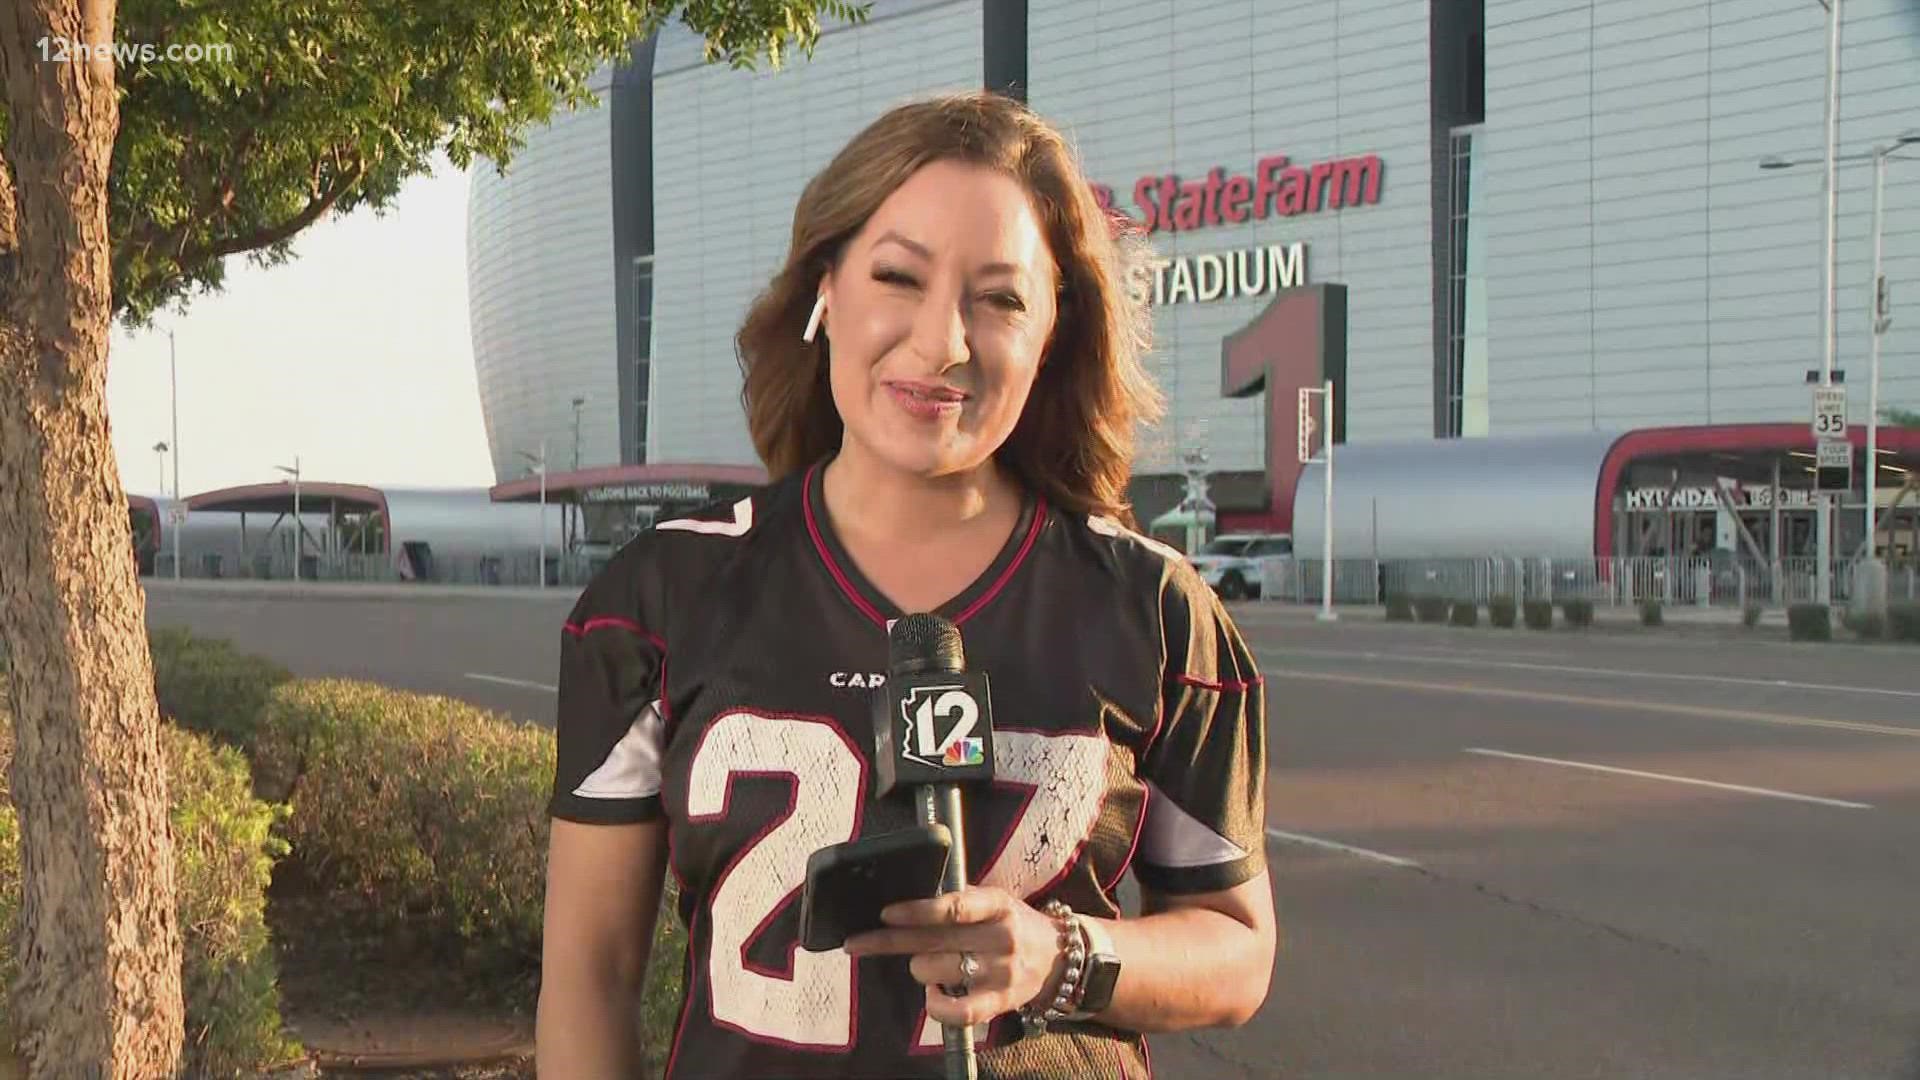 There are a few things fans should know before driving out to State Farm Stadium for Cardinals games this year. Jen Wahl has the details.